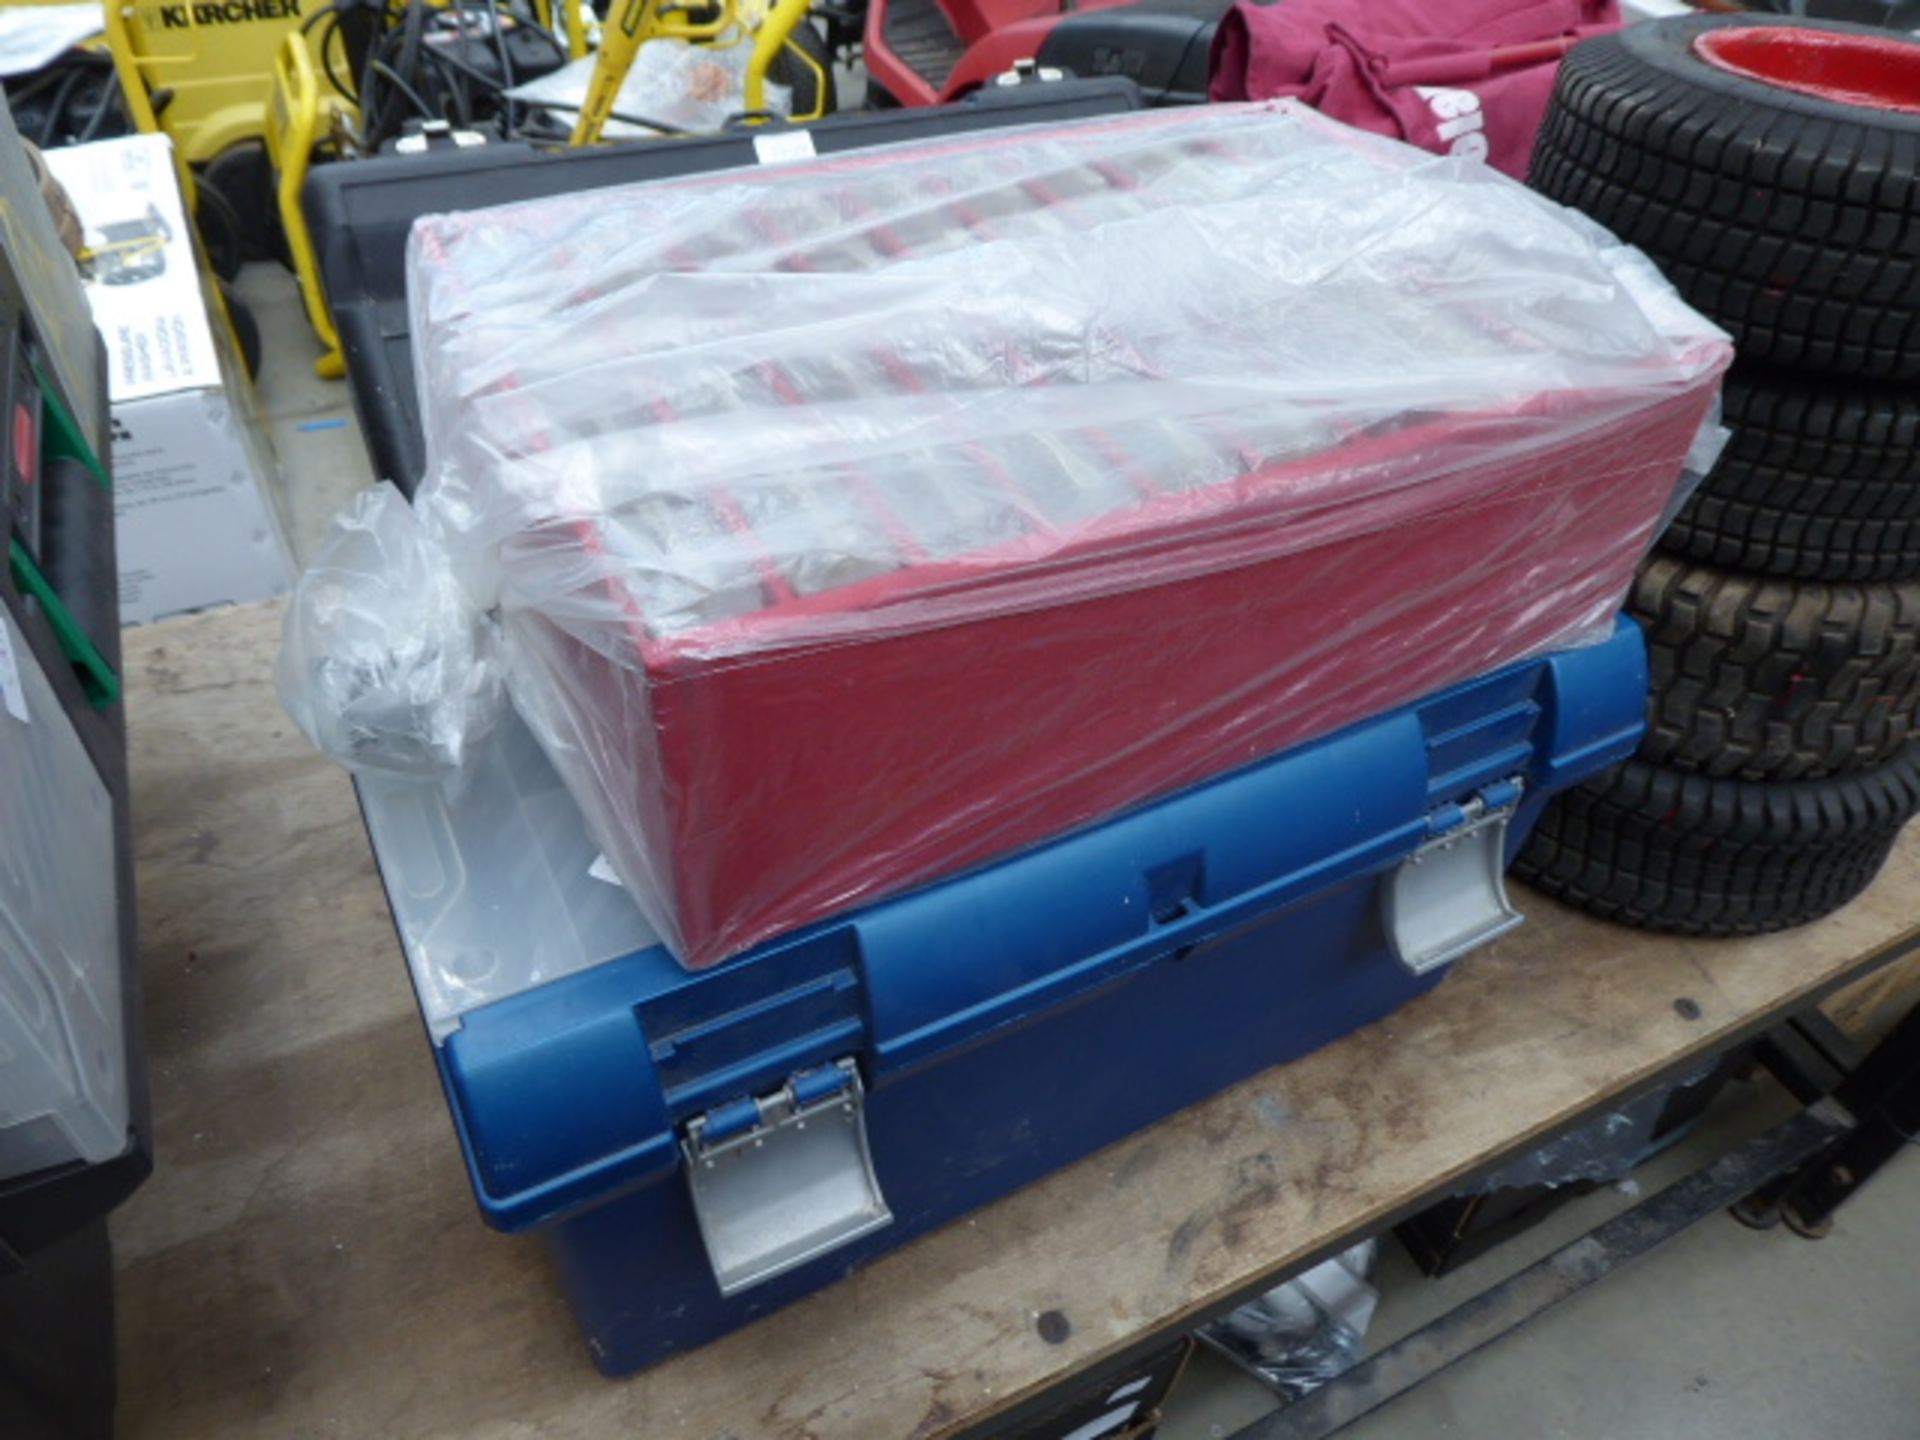 Blue Curver tool box and a red parts box